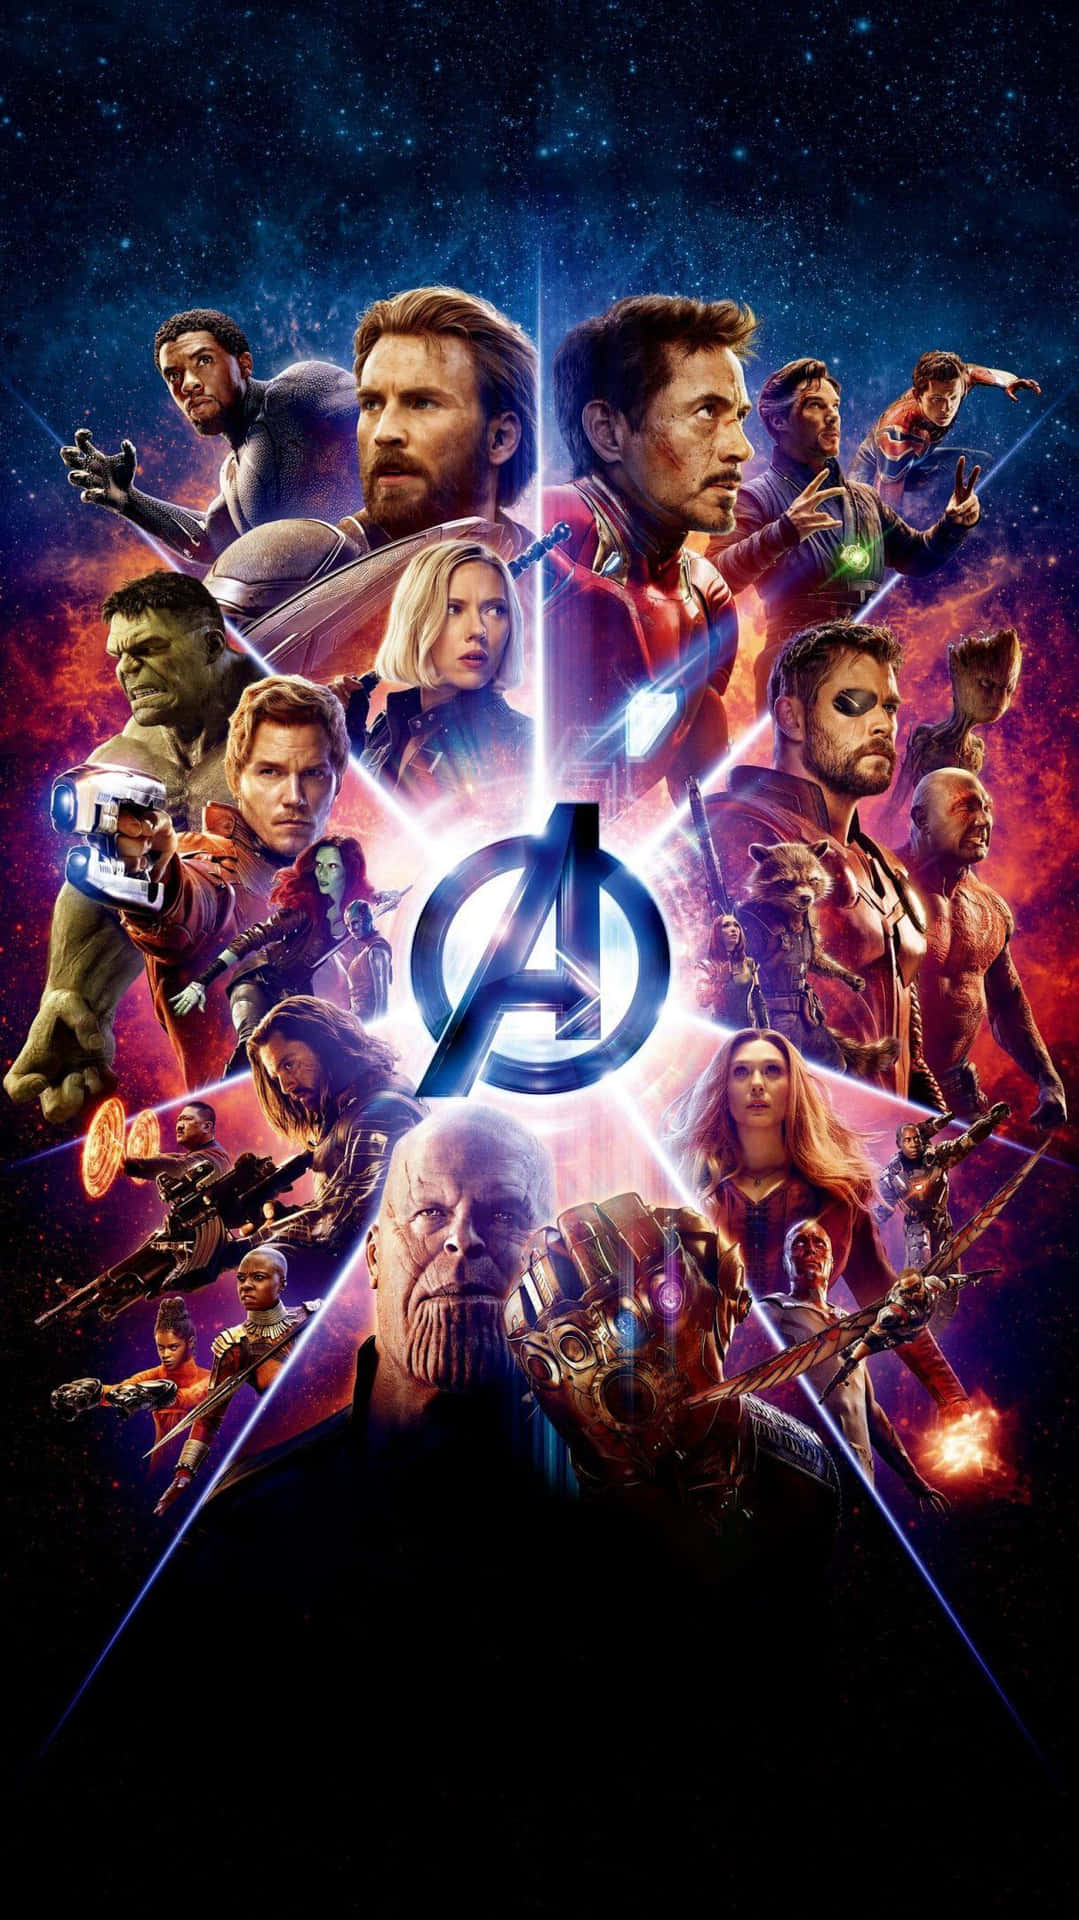 Avengers assemble one final time